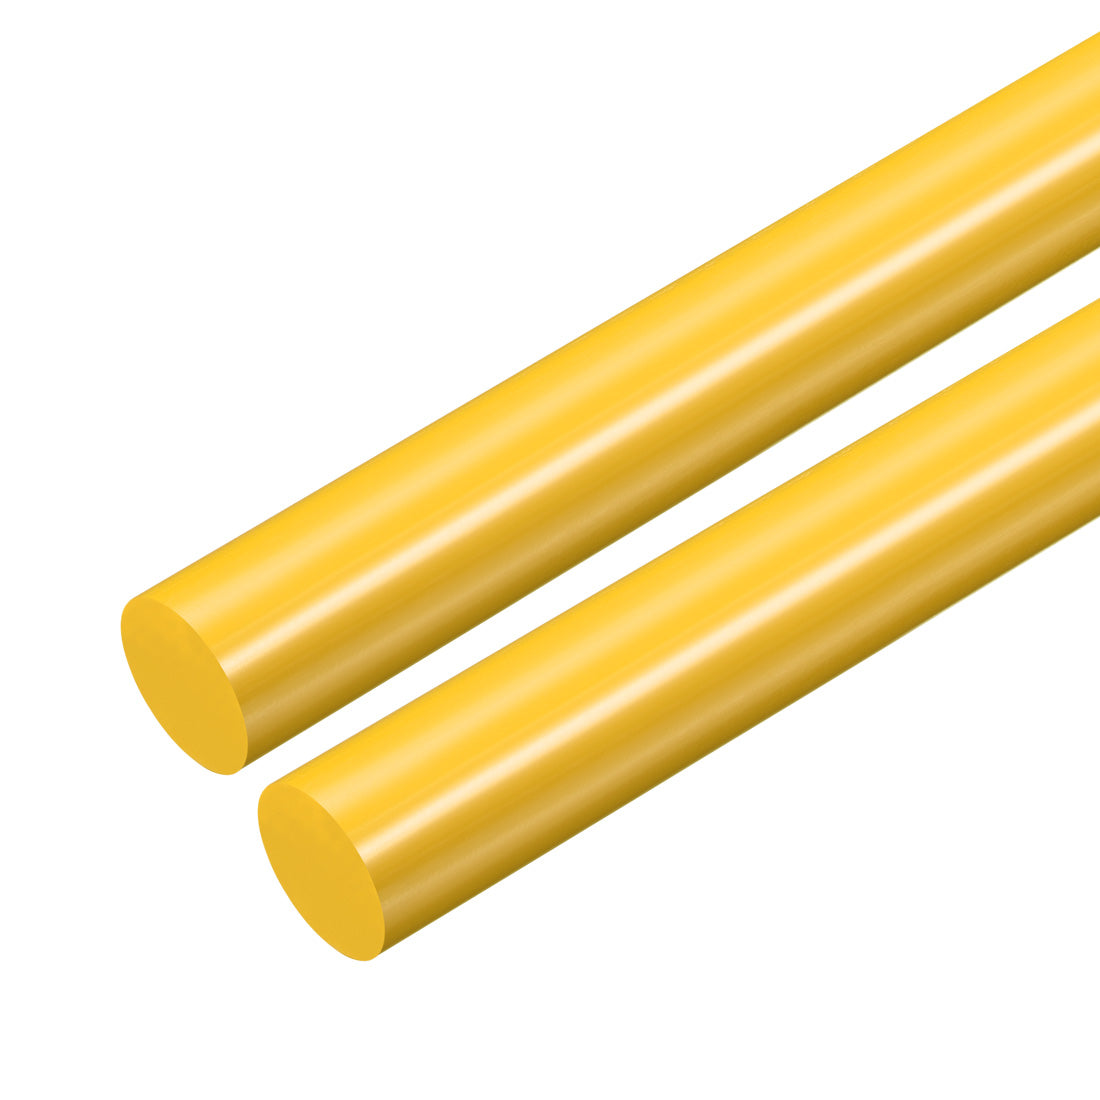 uxcell Uxcell Plastic Round Rod,20.5mm Dia 50cm Yellow Engineering Plastic Round Bar 2pcs